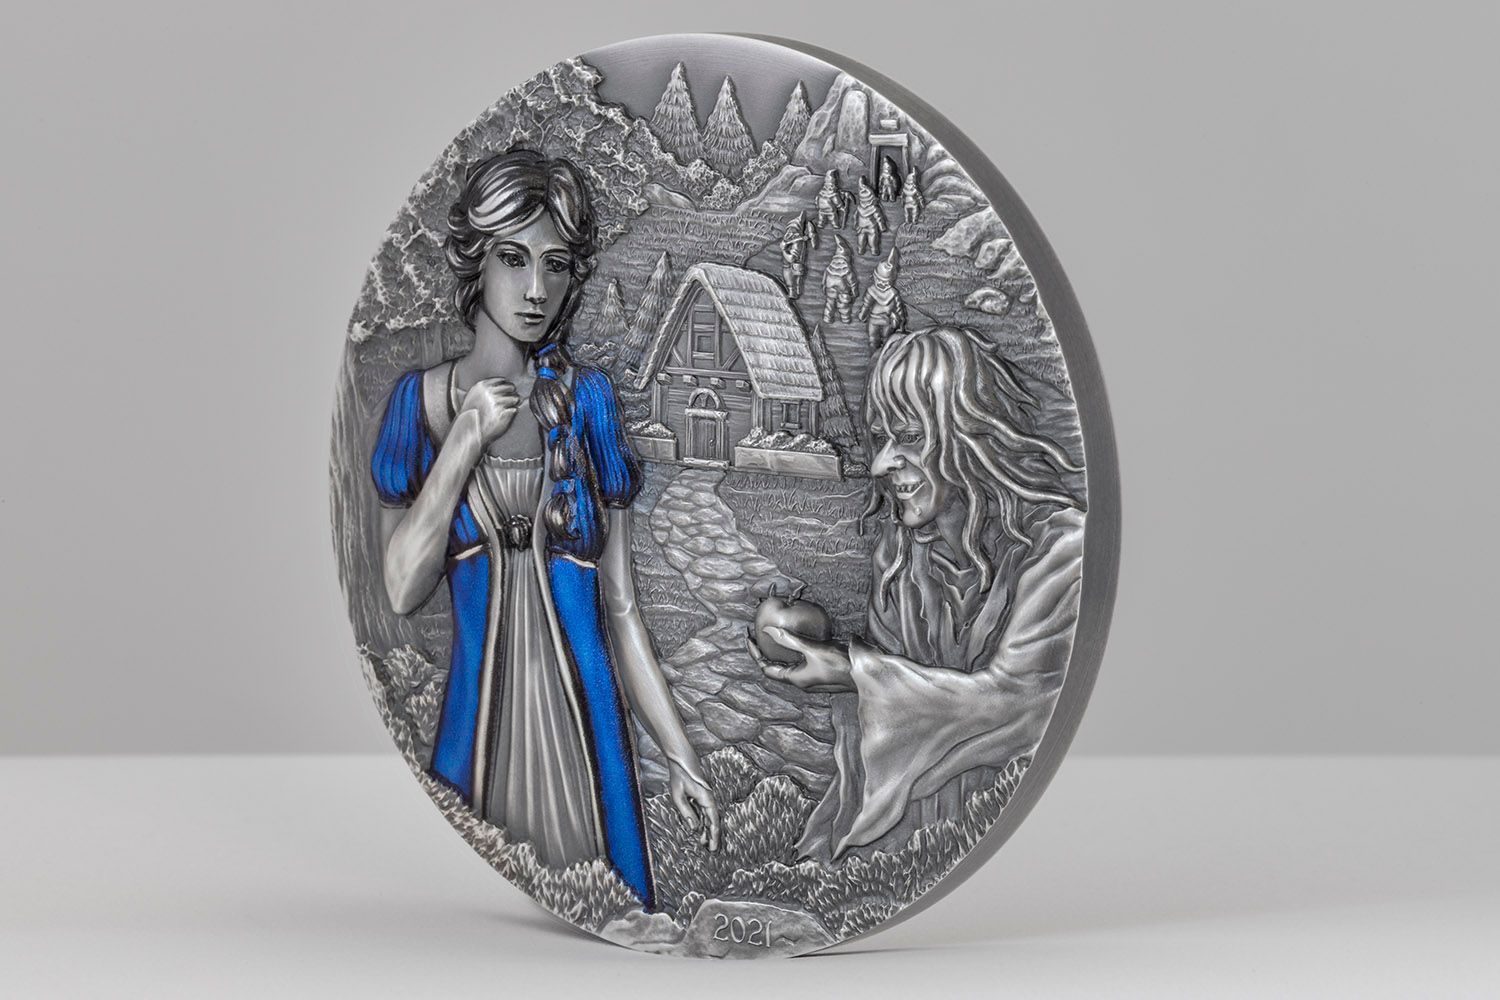 2021 Fairy Tales & Fables Snow White 3 oz Silver Coin